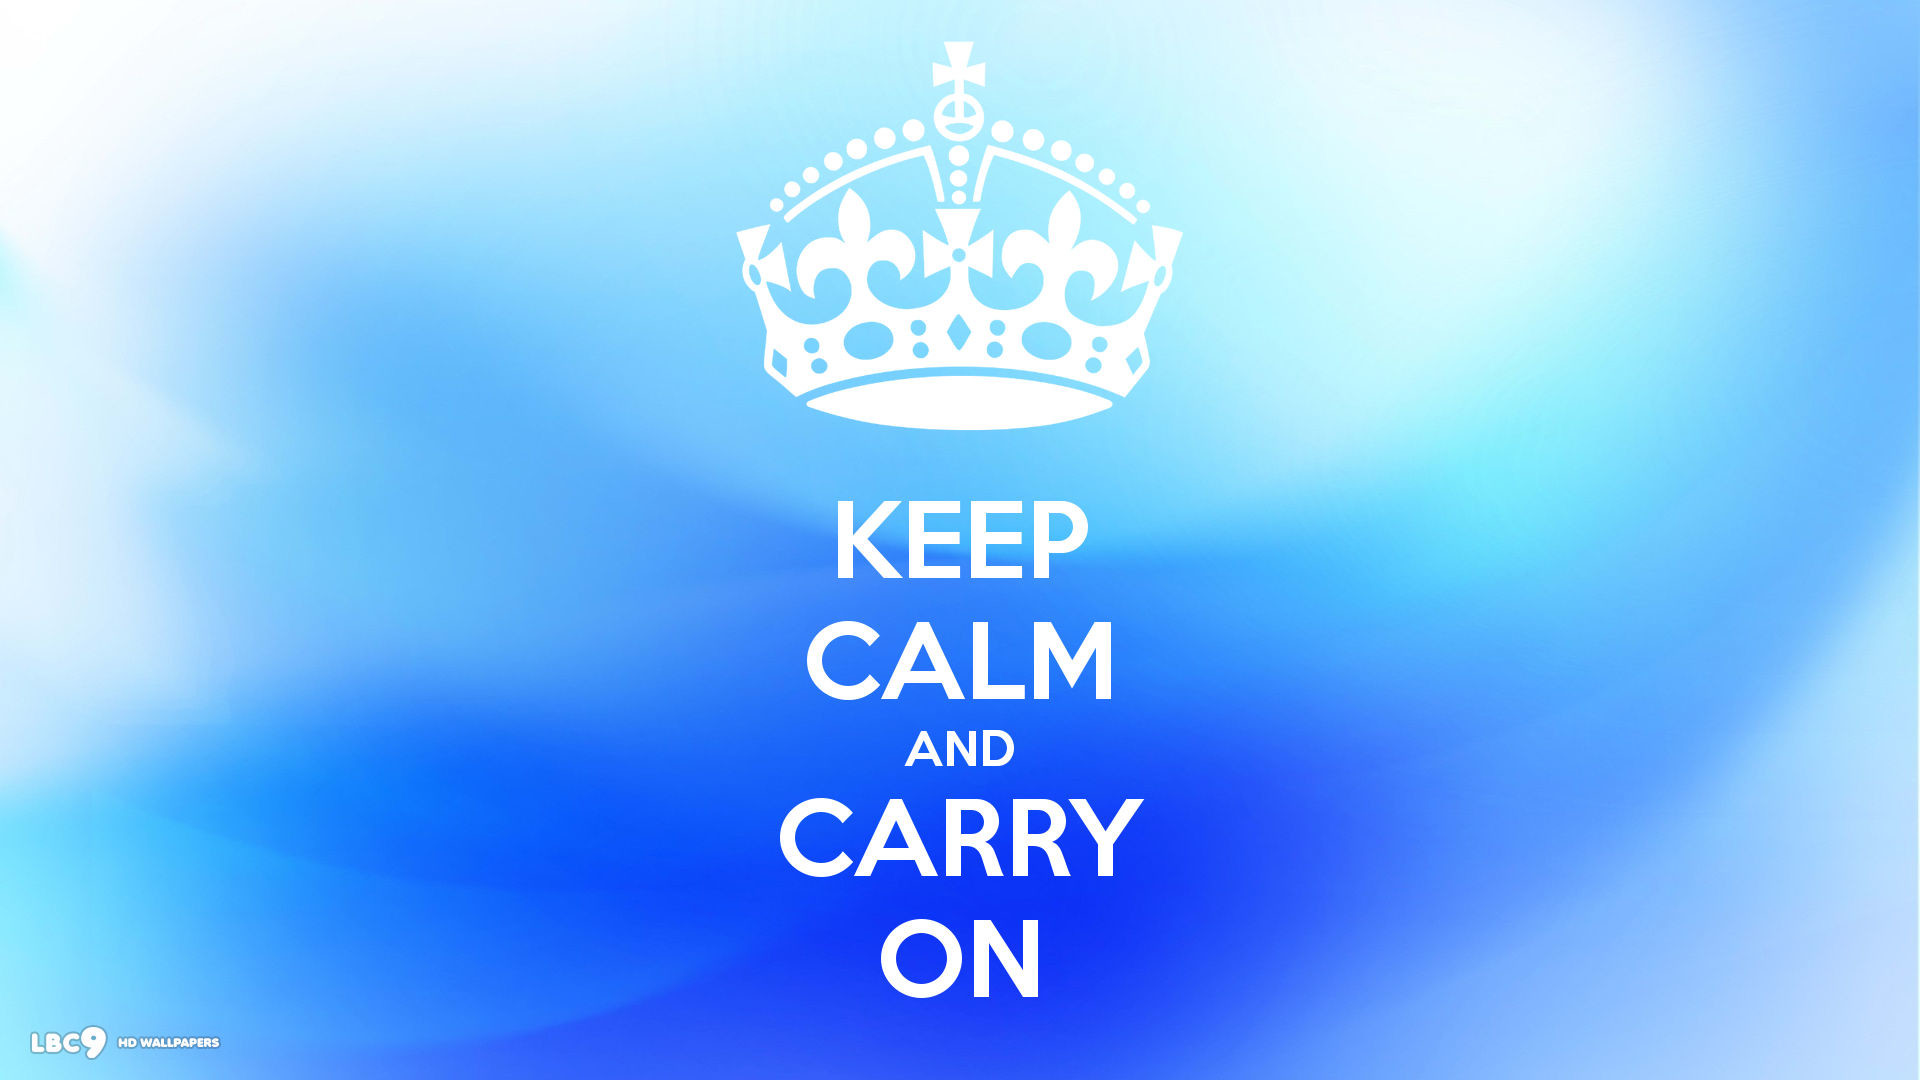 Most Beautiful Photo - Keep Calm And Carry - HD Wallpaper 